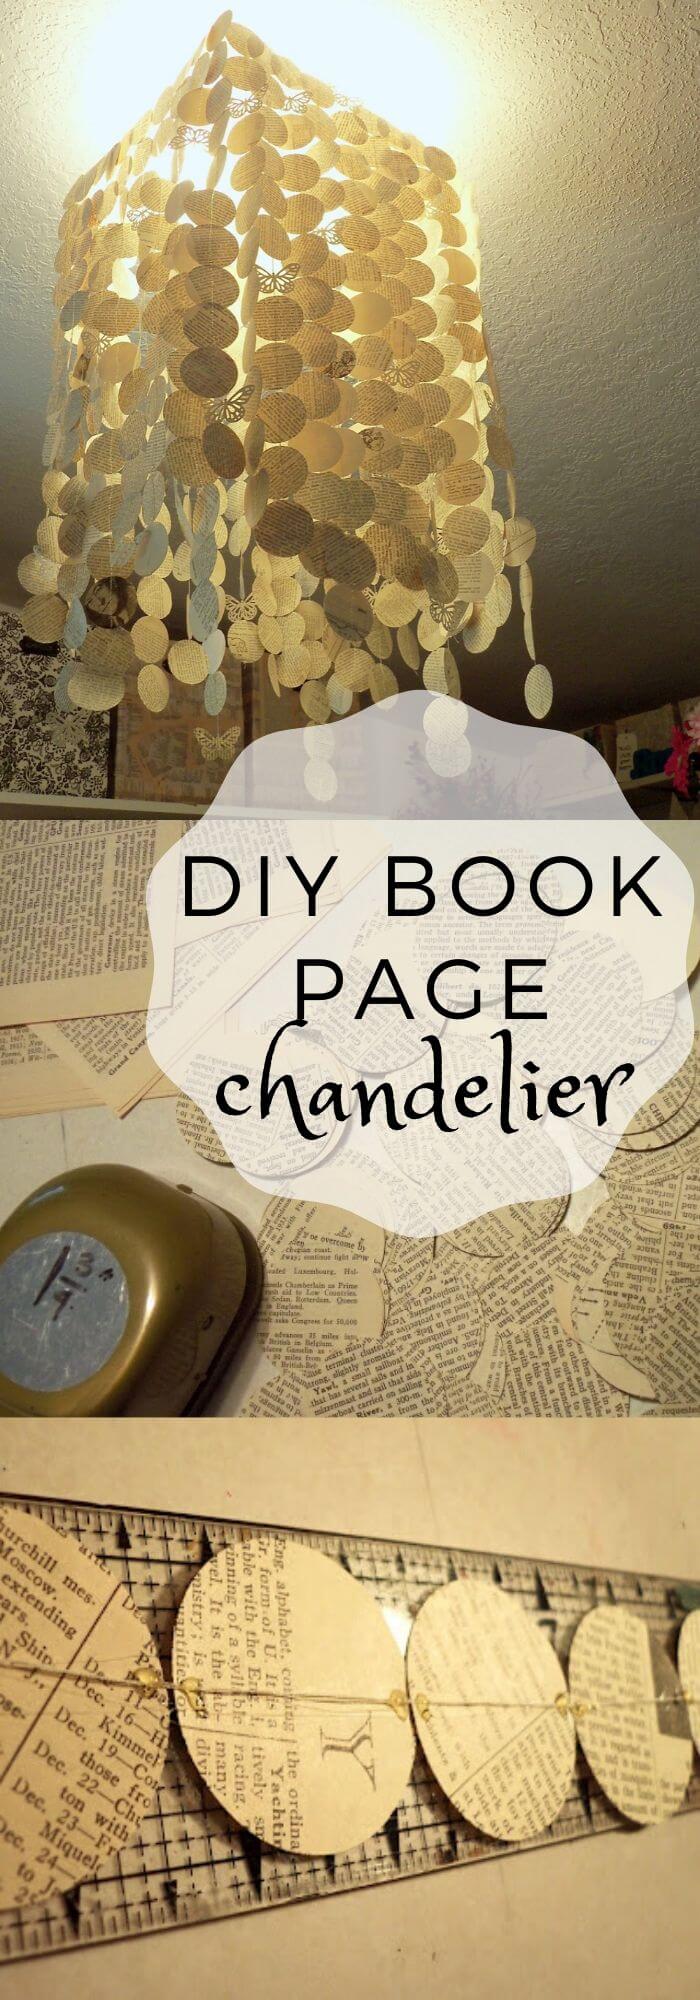 Make a Chandelier from book